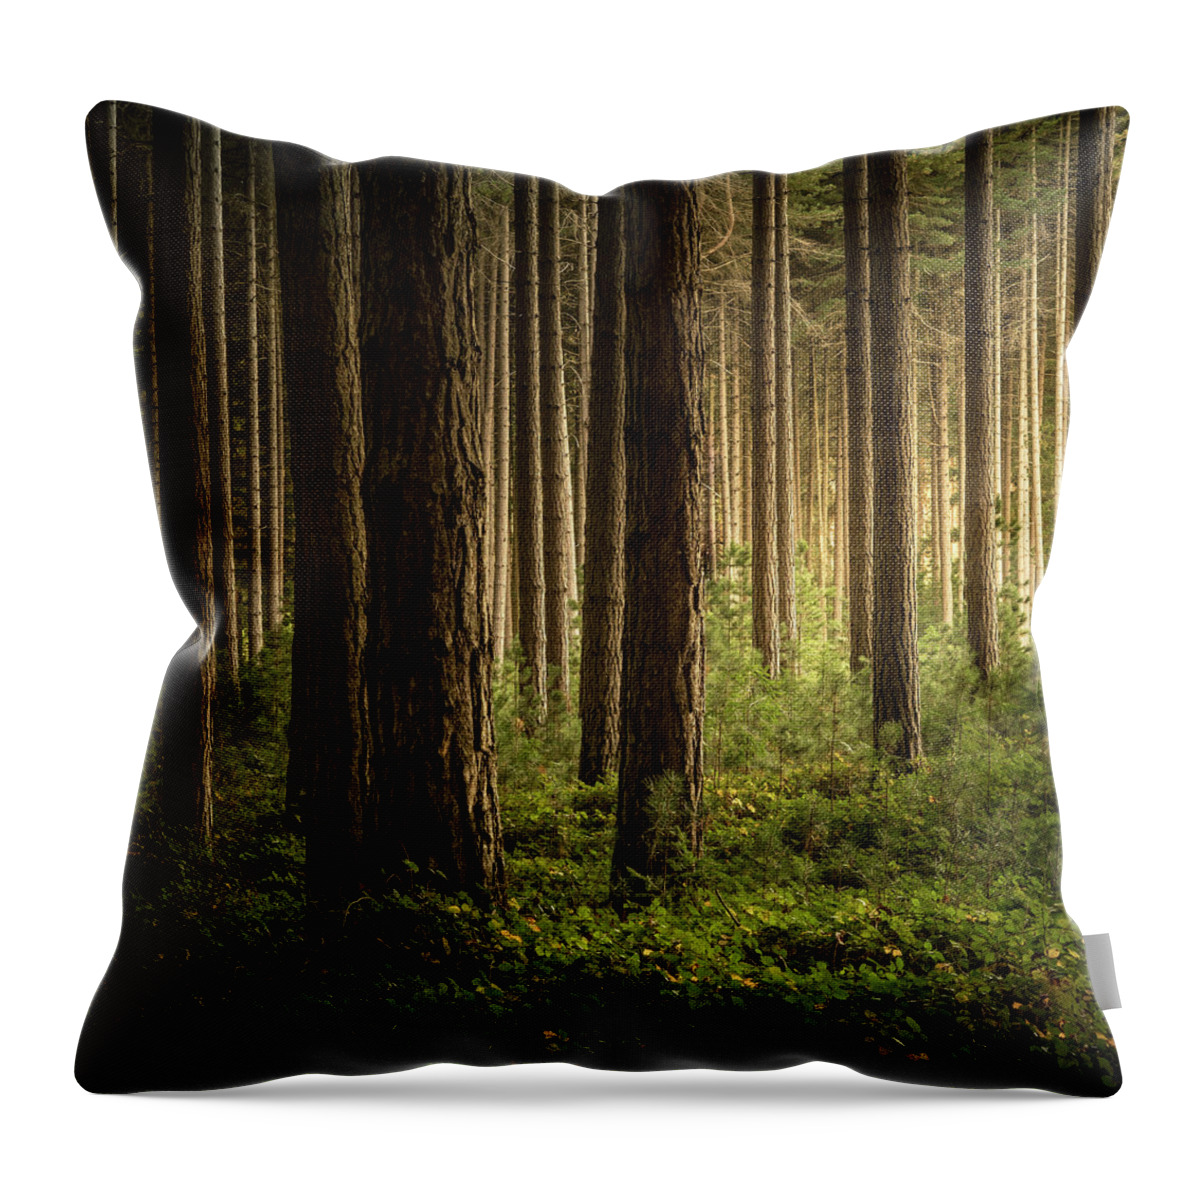 Landscape Throw Pillow featuring the photograph Forest Light by Grant Galbraith